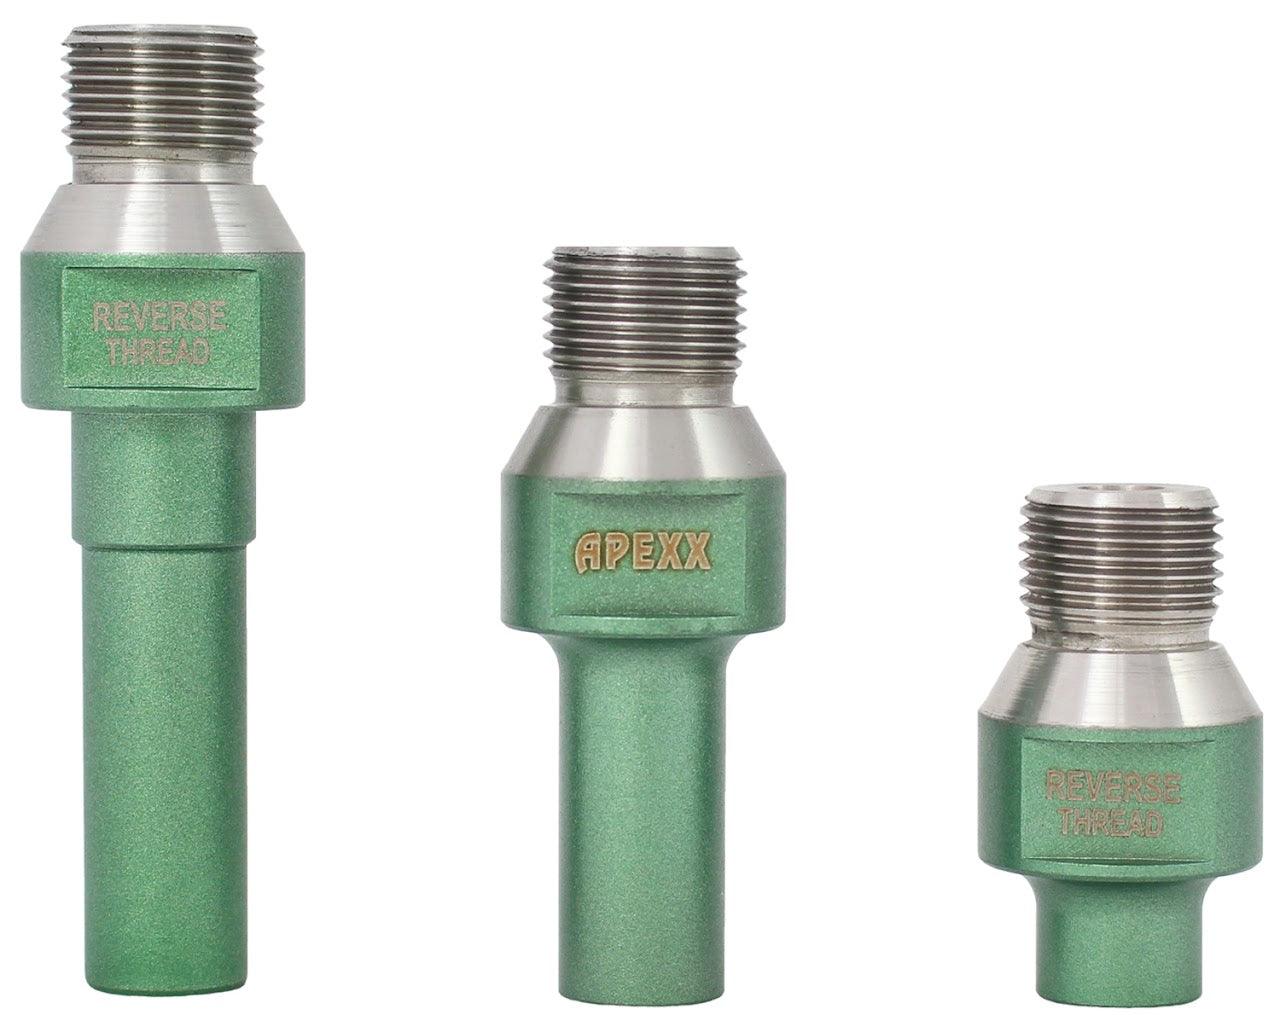 APEXX Reverse-Thread Adapters for Incremental Cutting Bits 3" - Direct Stone Tool Supply, Inc